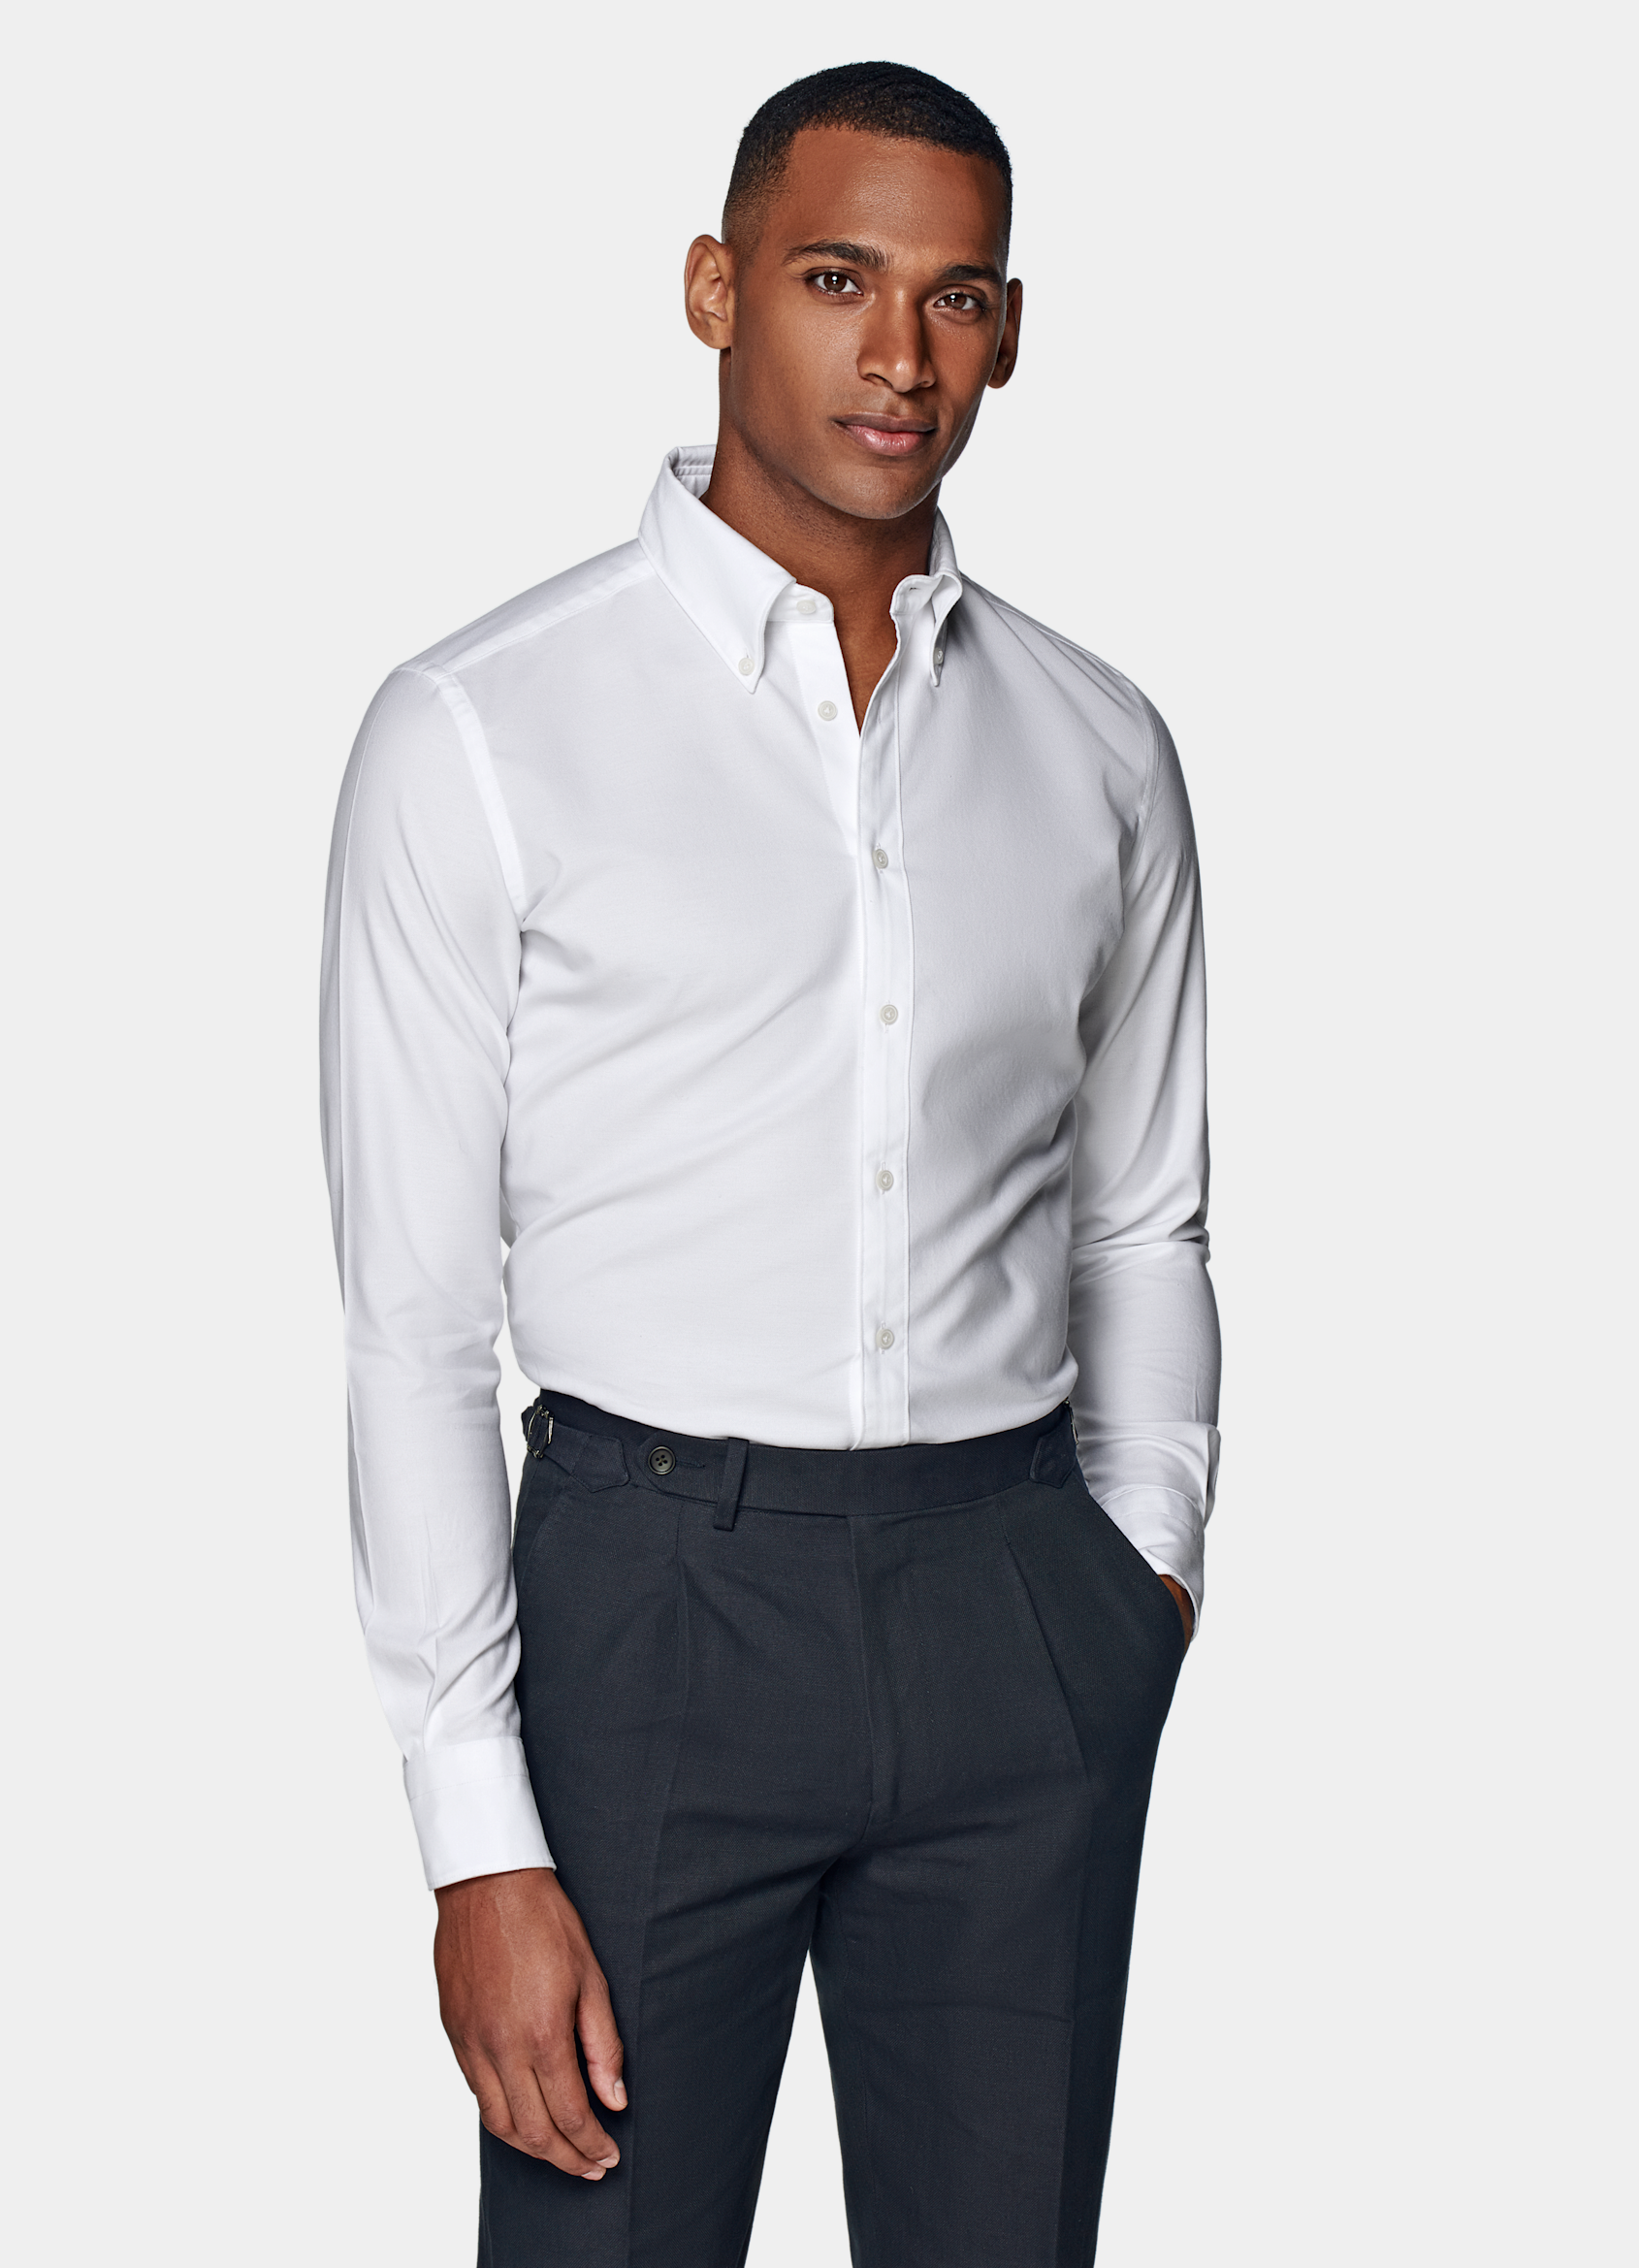 17 Best White Dress Shirts for Men 2023, According to Style Experts